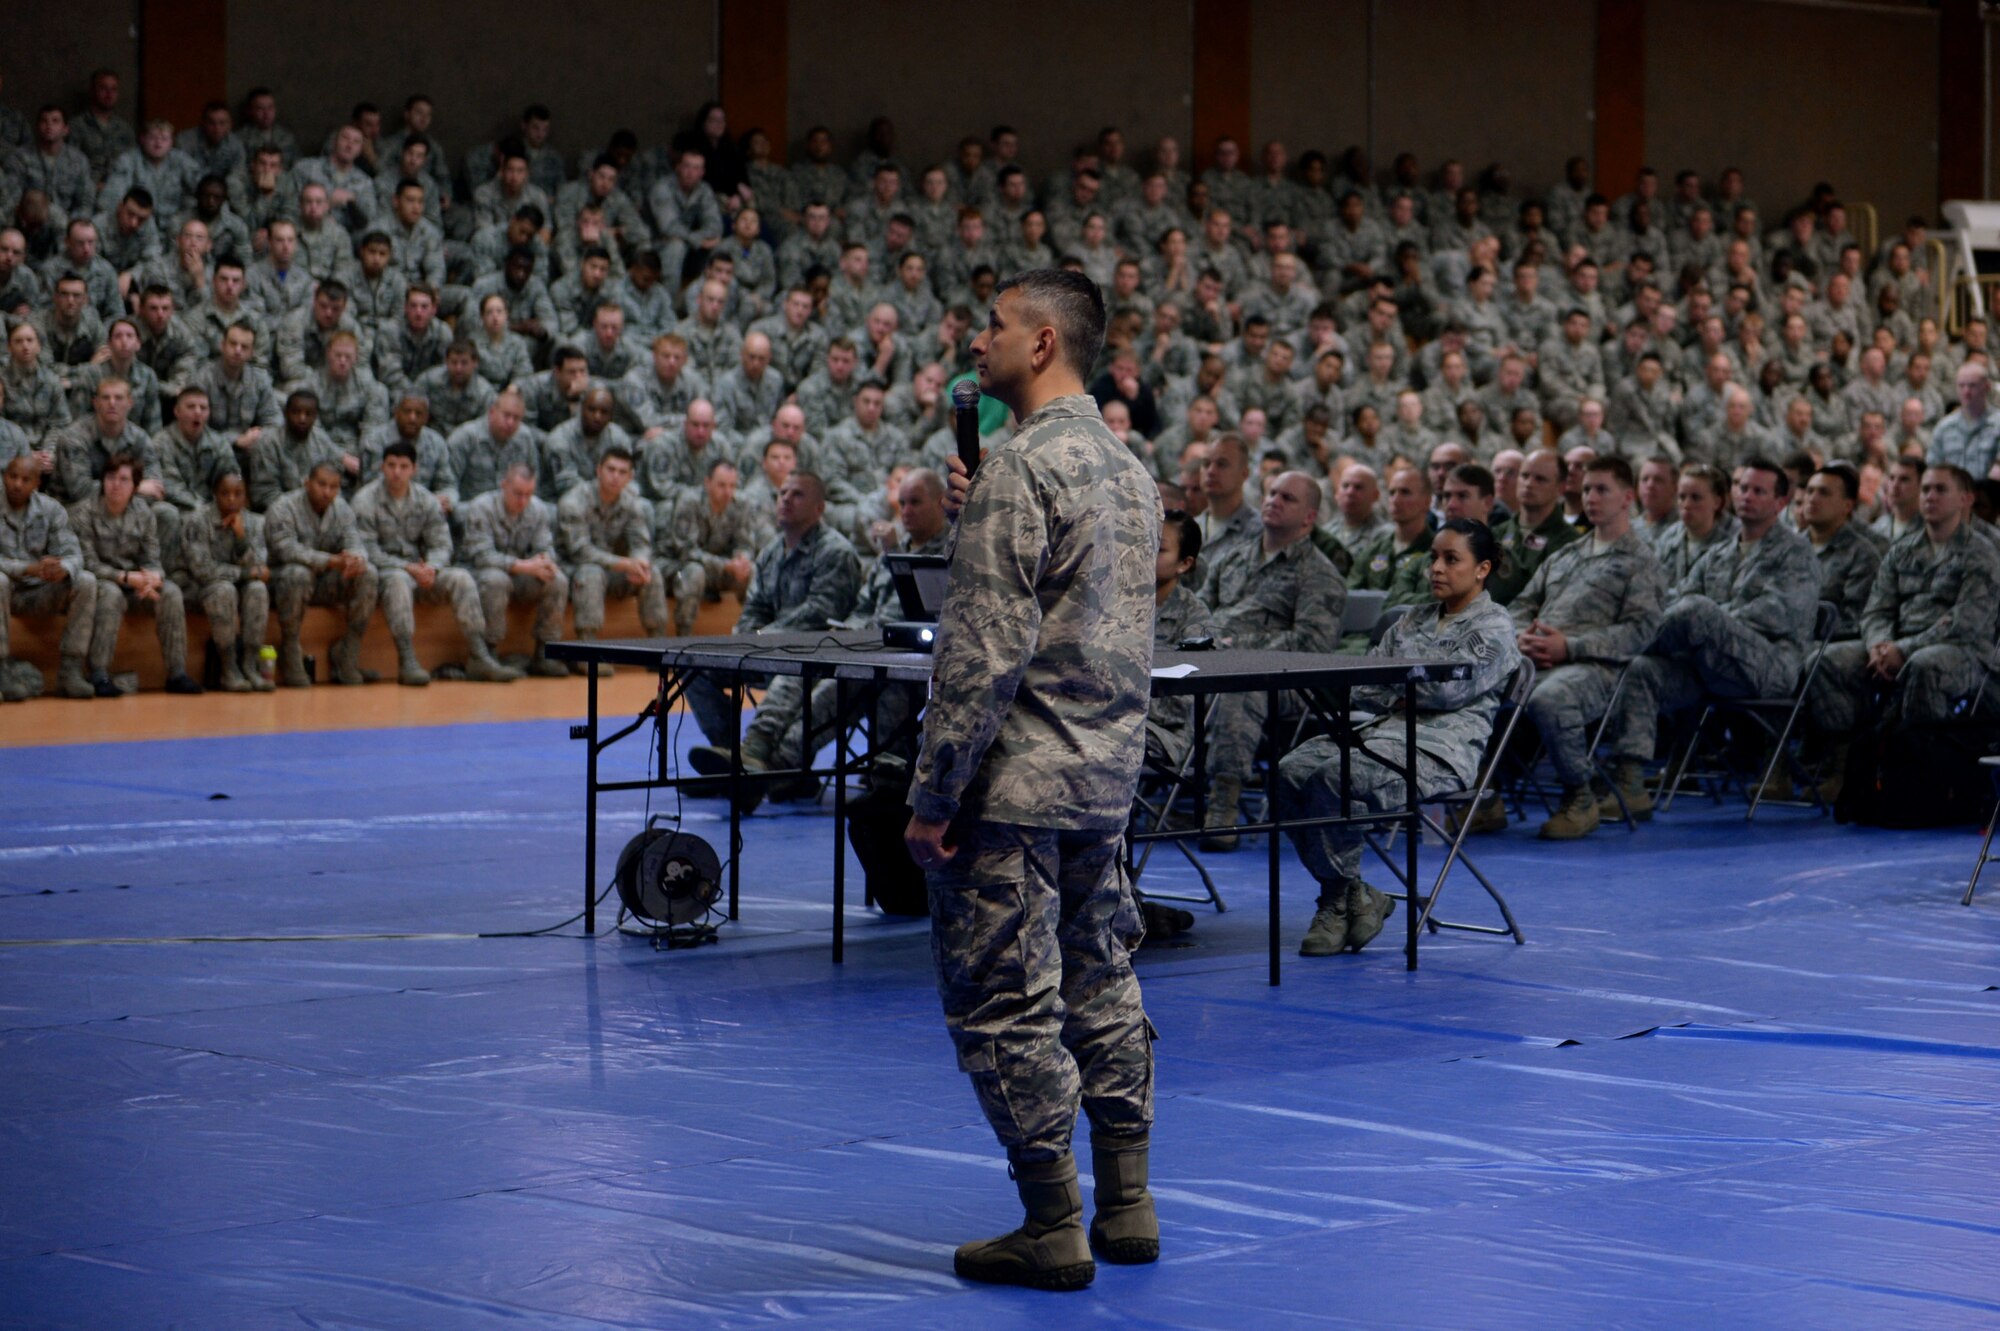 U.S. Air Force Col. David Julazadeh, 52nd Fighter Wing commander, holds an all call at the Skelton Memorial Fitness Center on Spangdahlem Air Base, Germany, April 18, 2014. Julazadeh spoke of stepping in as a bystander and how to identify the behavior of a potential perpetrator. (U.S. Air Force photo by Senior Airman Alexis Siekert/Released)